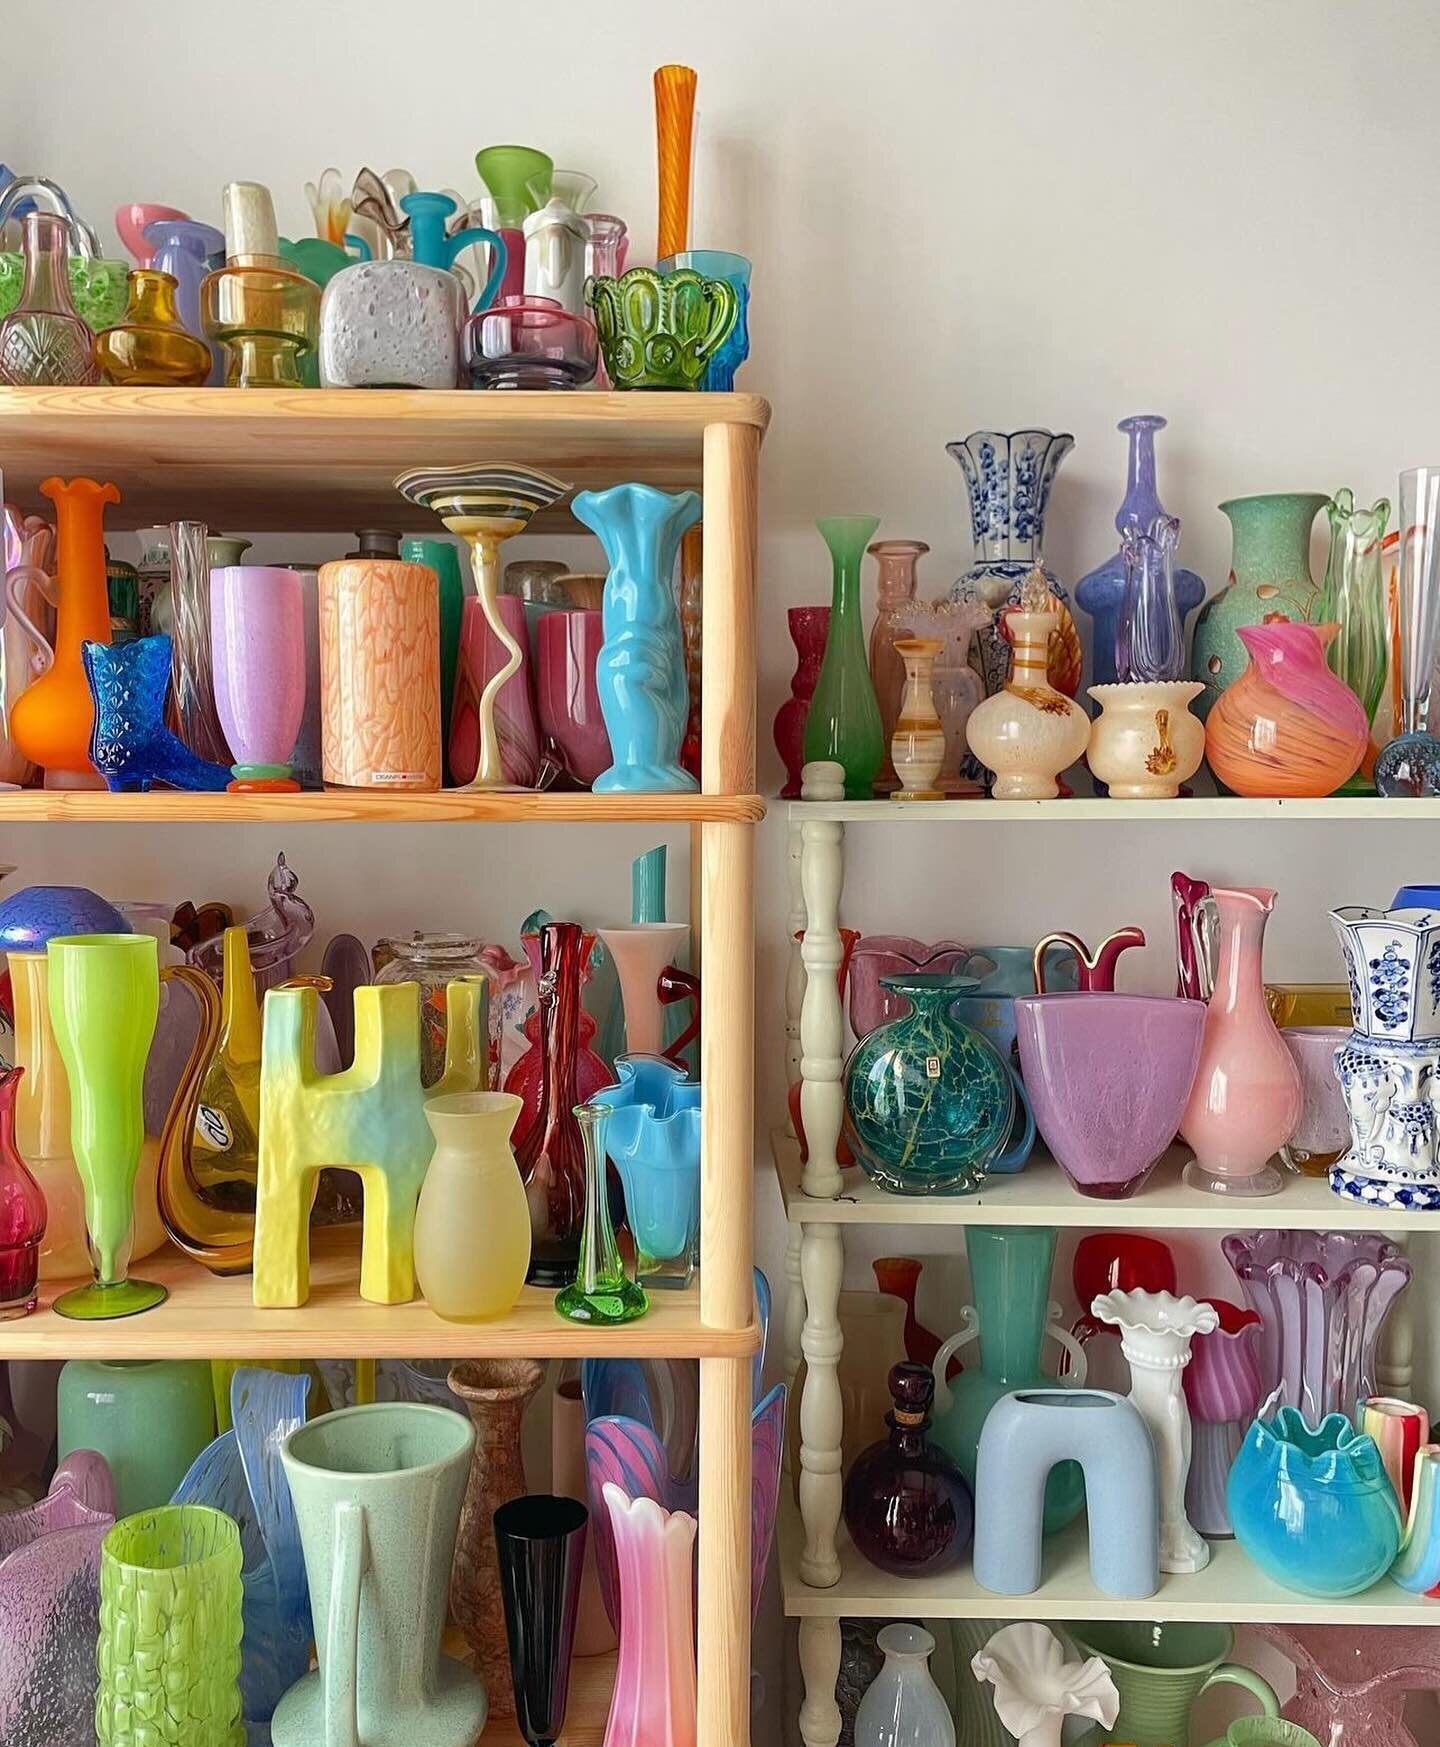 vase collection GOALS 🔥 when we eventually live in a house with more storage one day, try and stop me from having shelves like this everywhere 😍😍😍

via @cc_tomoy